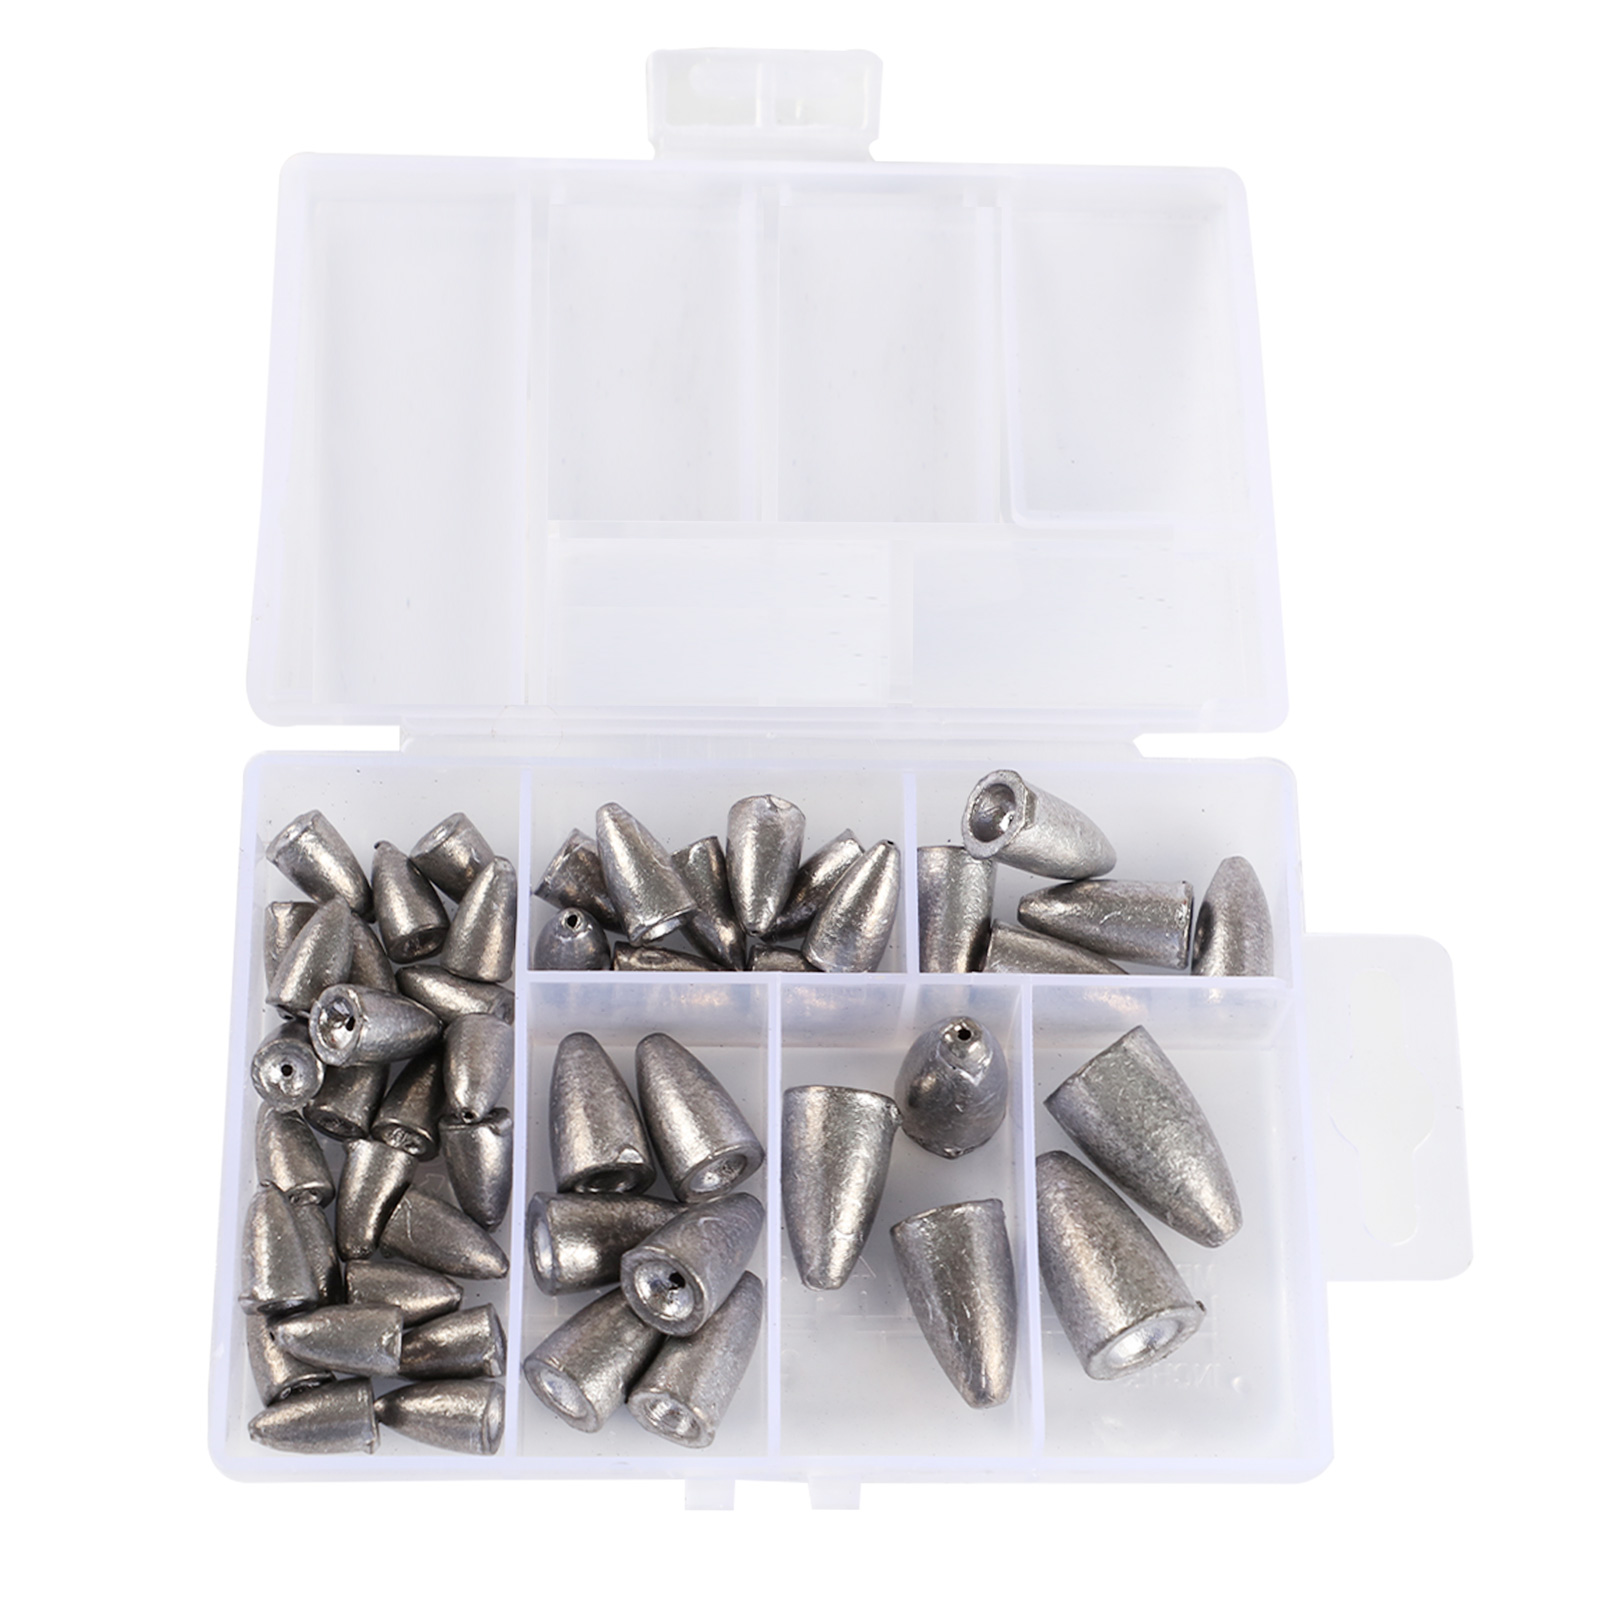 FREE FISHER 50pcs/Box Lure Bullet Plumb Lead Sinker With Box Fishing Weights Multi-Size Pendant Throwing Fishing Tackle Accessories Tools